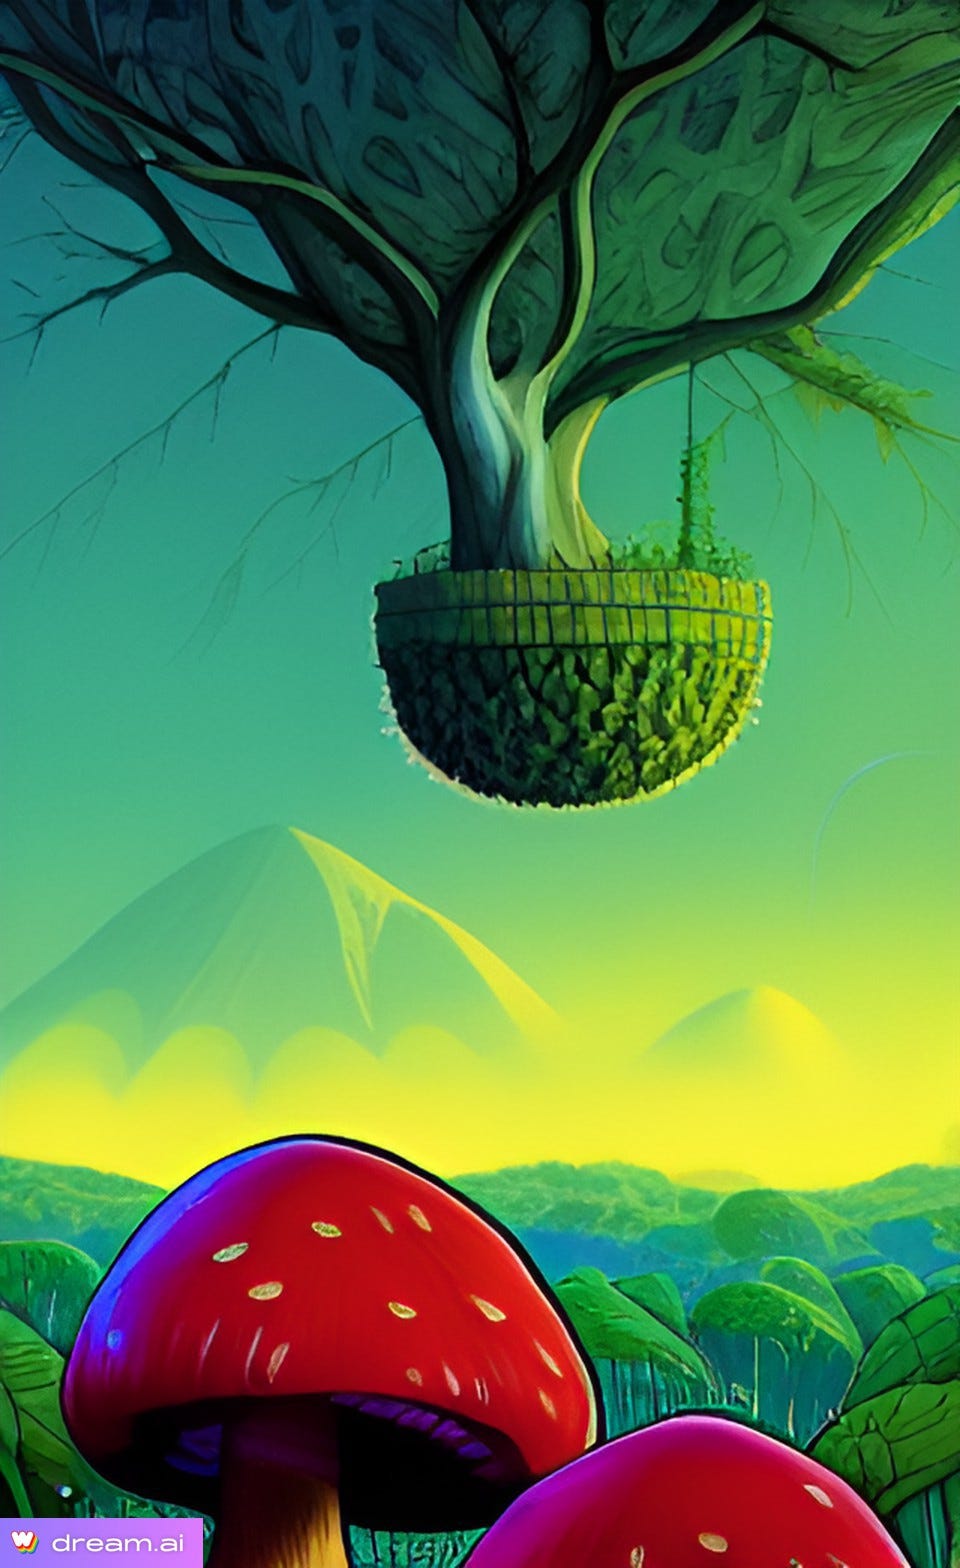 A.I. image of a tree in a pot floating over some mushrooms with a mountain range in the distance.